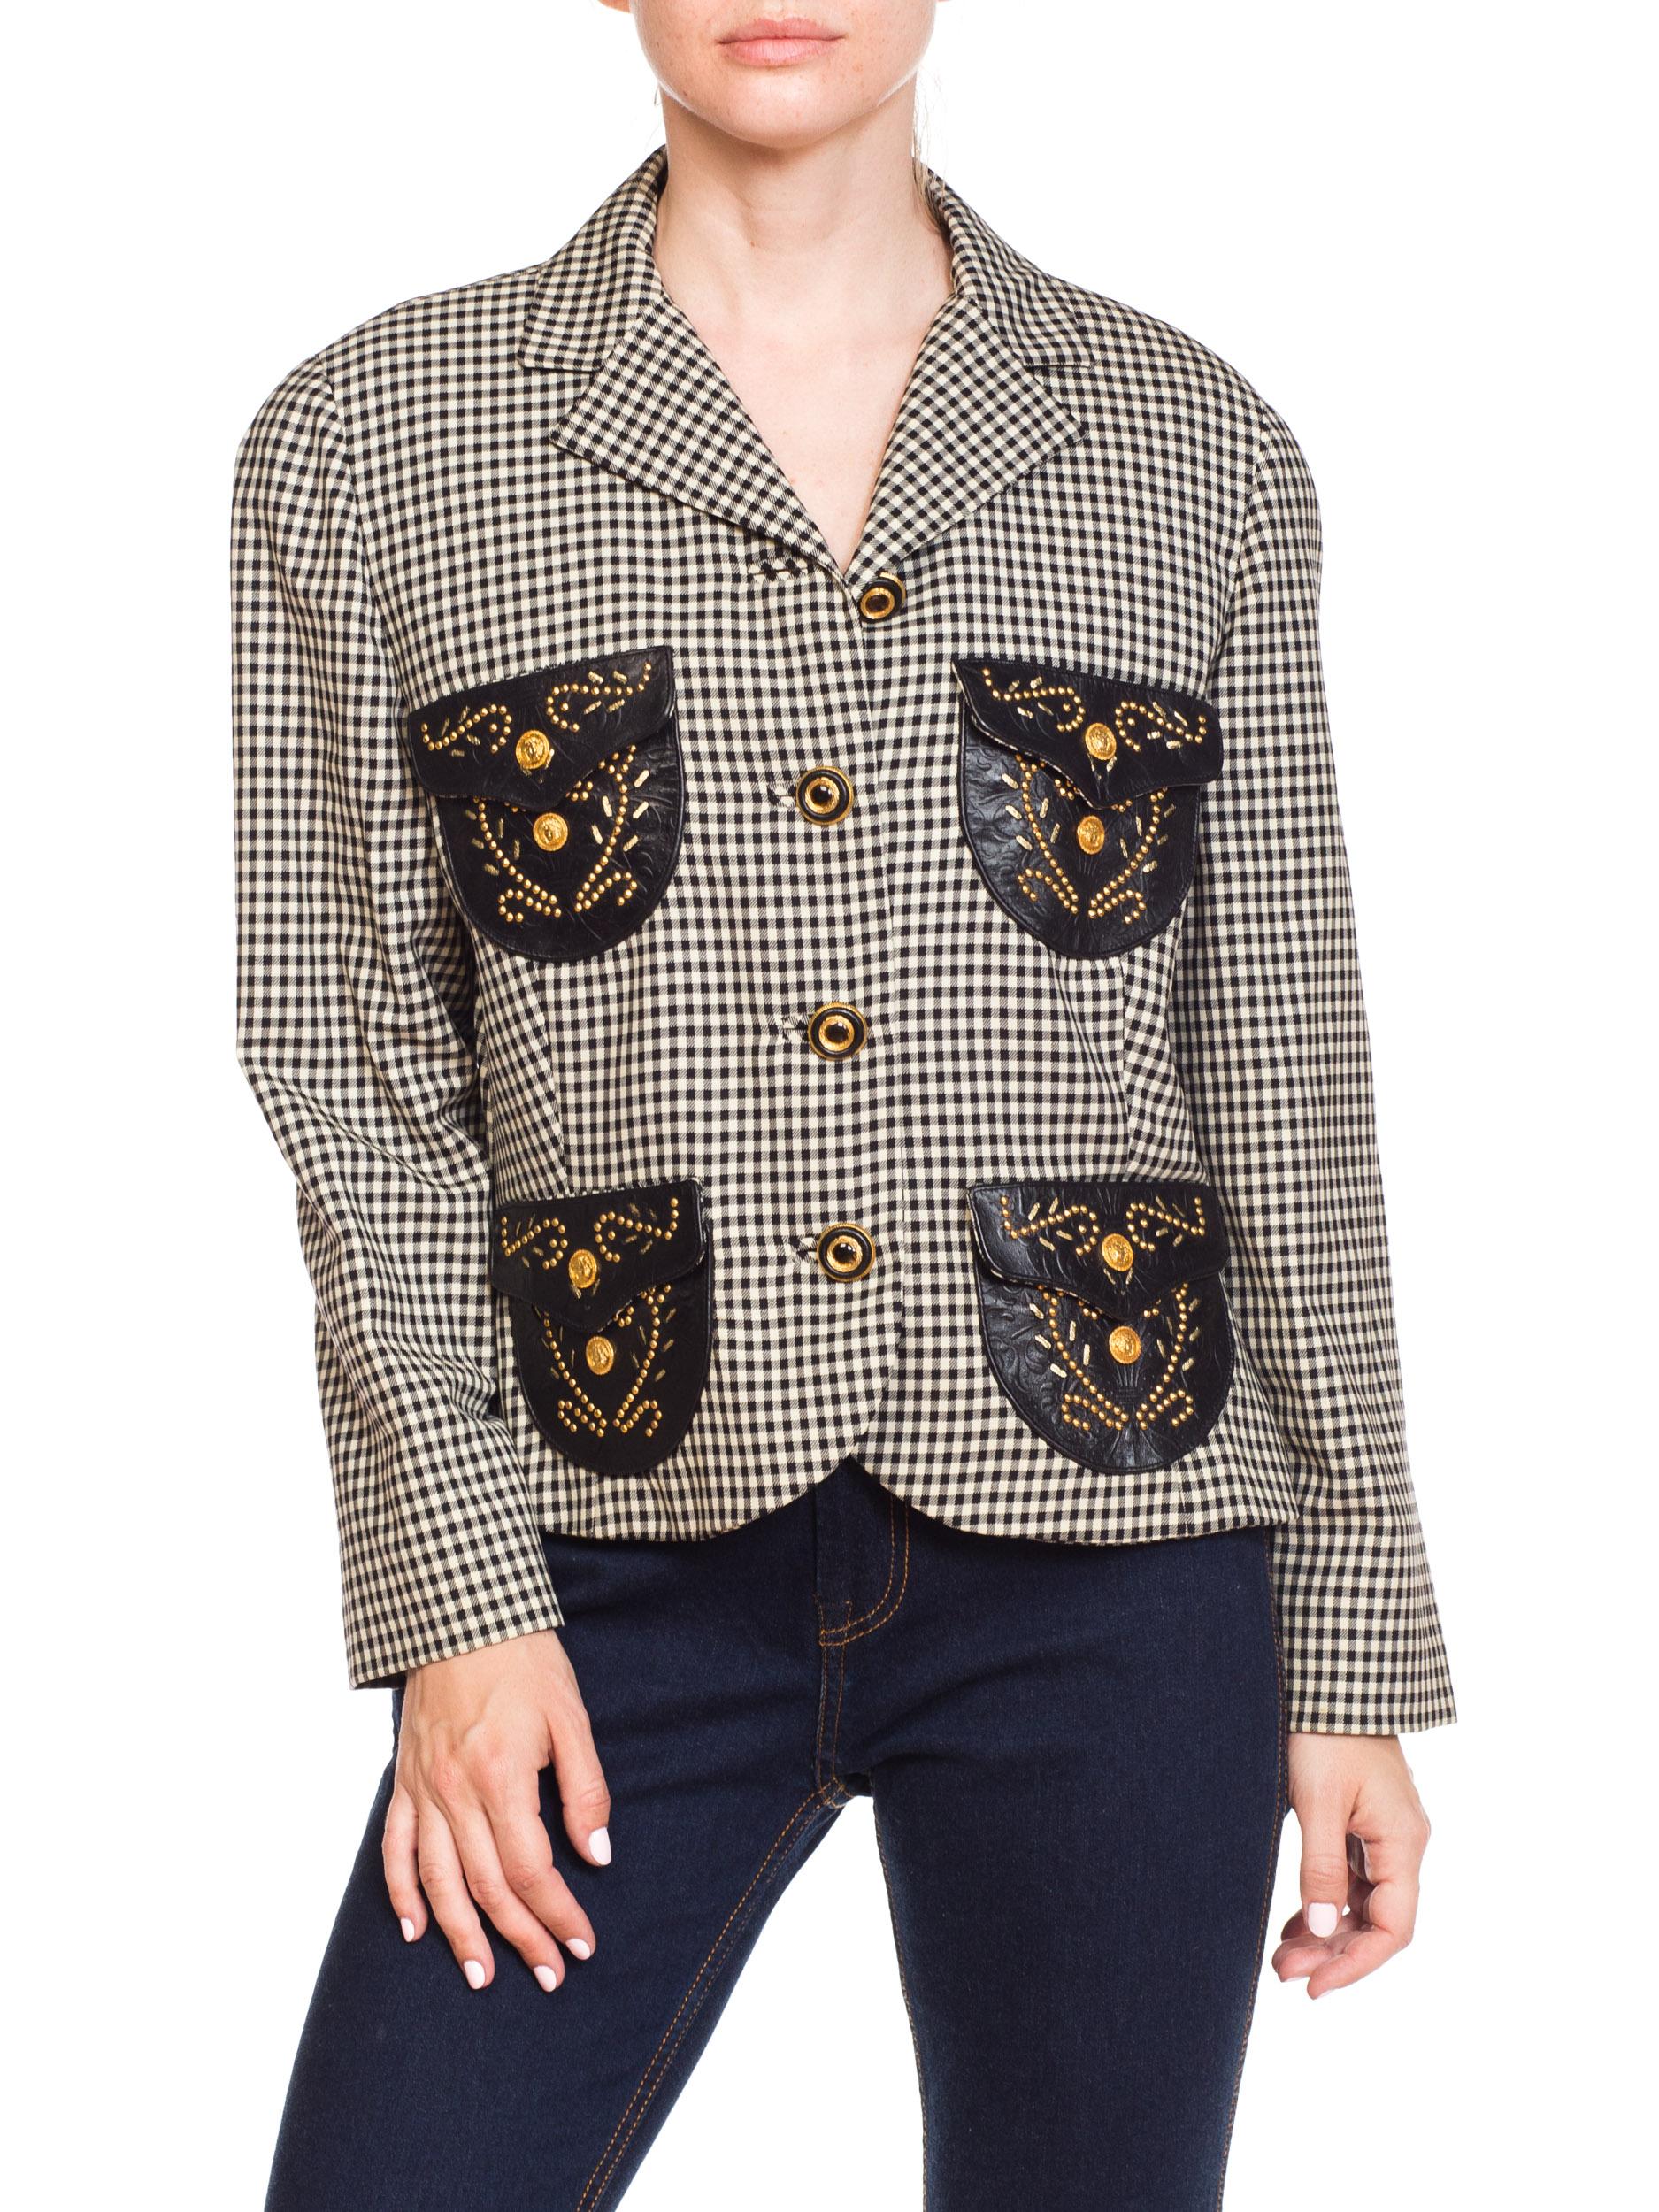 1990S GIANNI VERSACE Western Collection Jacket With Gold Stud & Leather Details 4